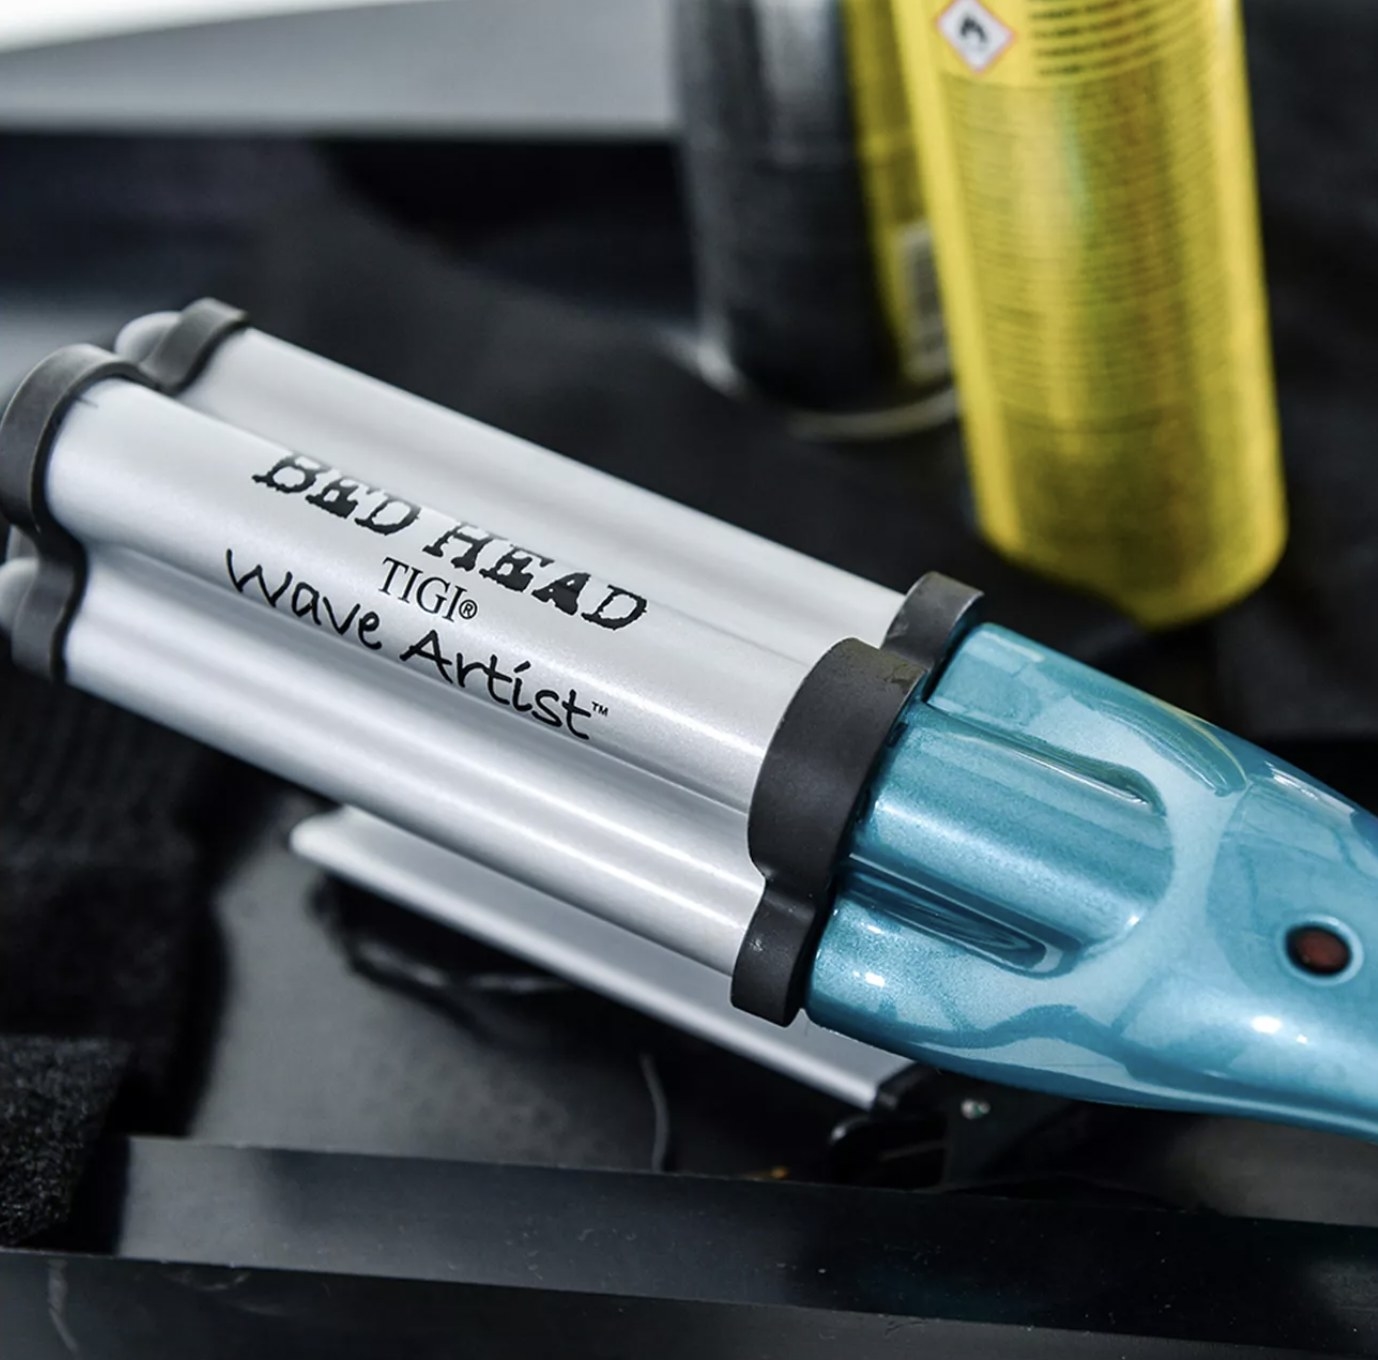 A heat-styling tool with a can of hairspray